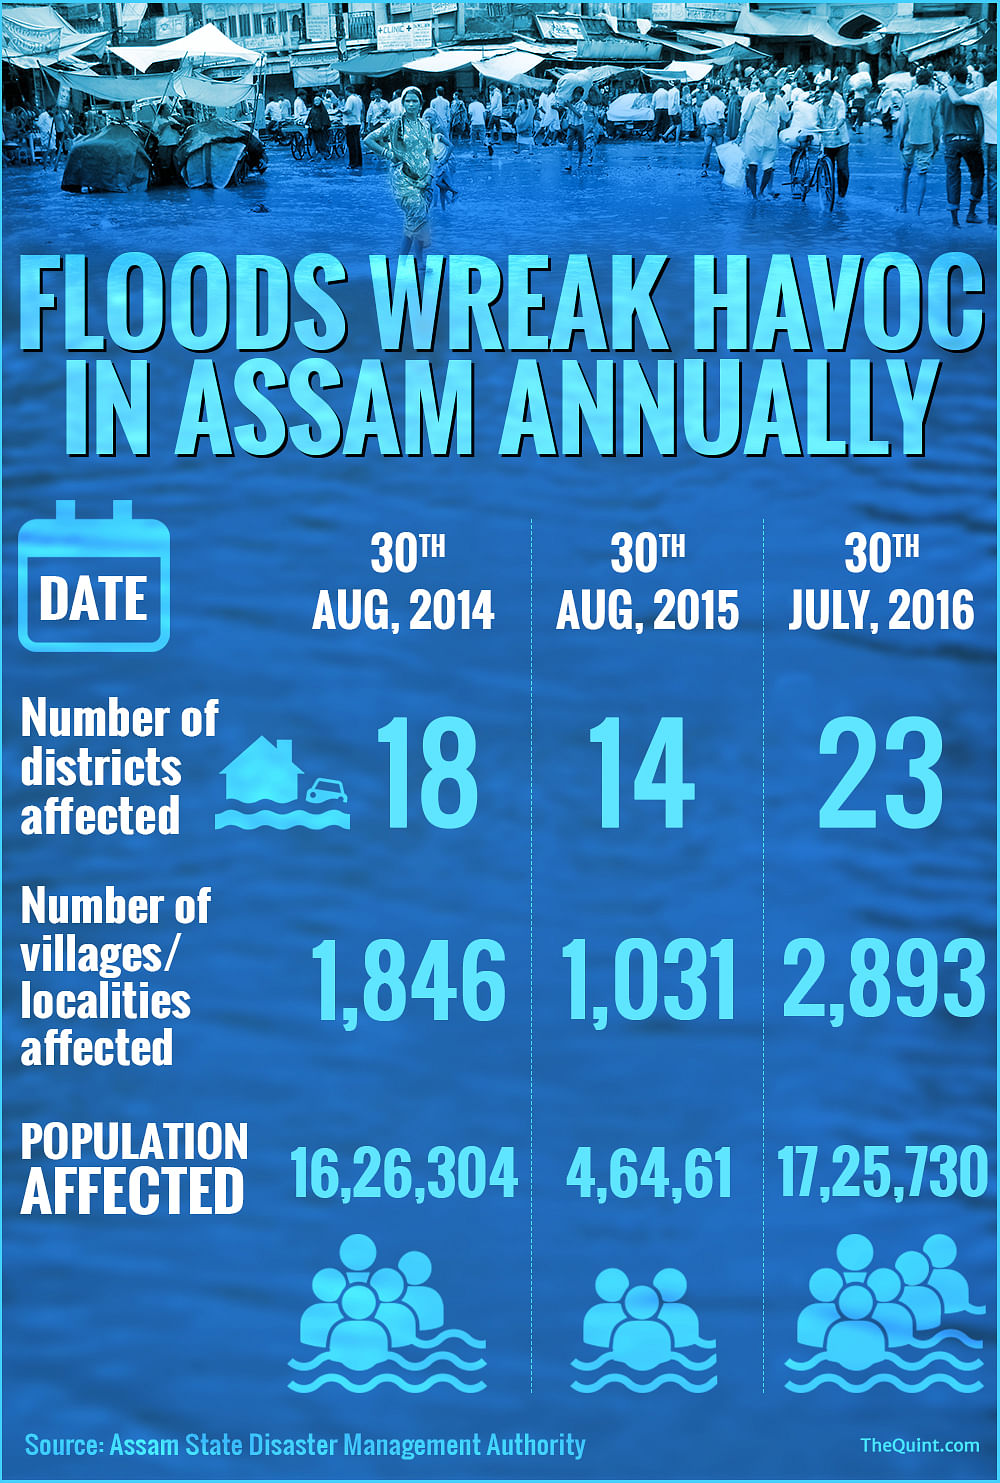 Annual floods wreak havoc in Assam. How far has the government gone to tackle floods?